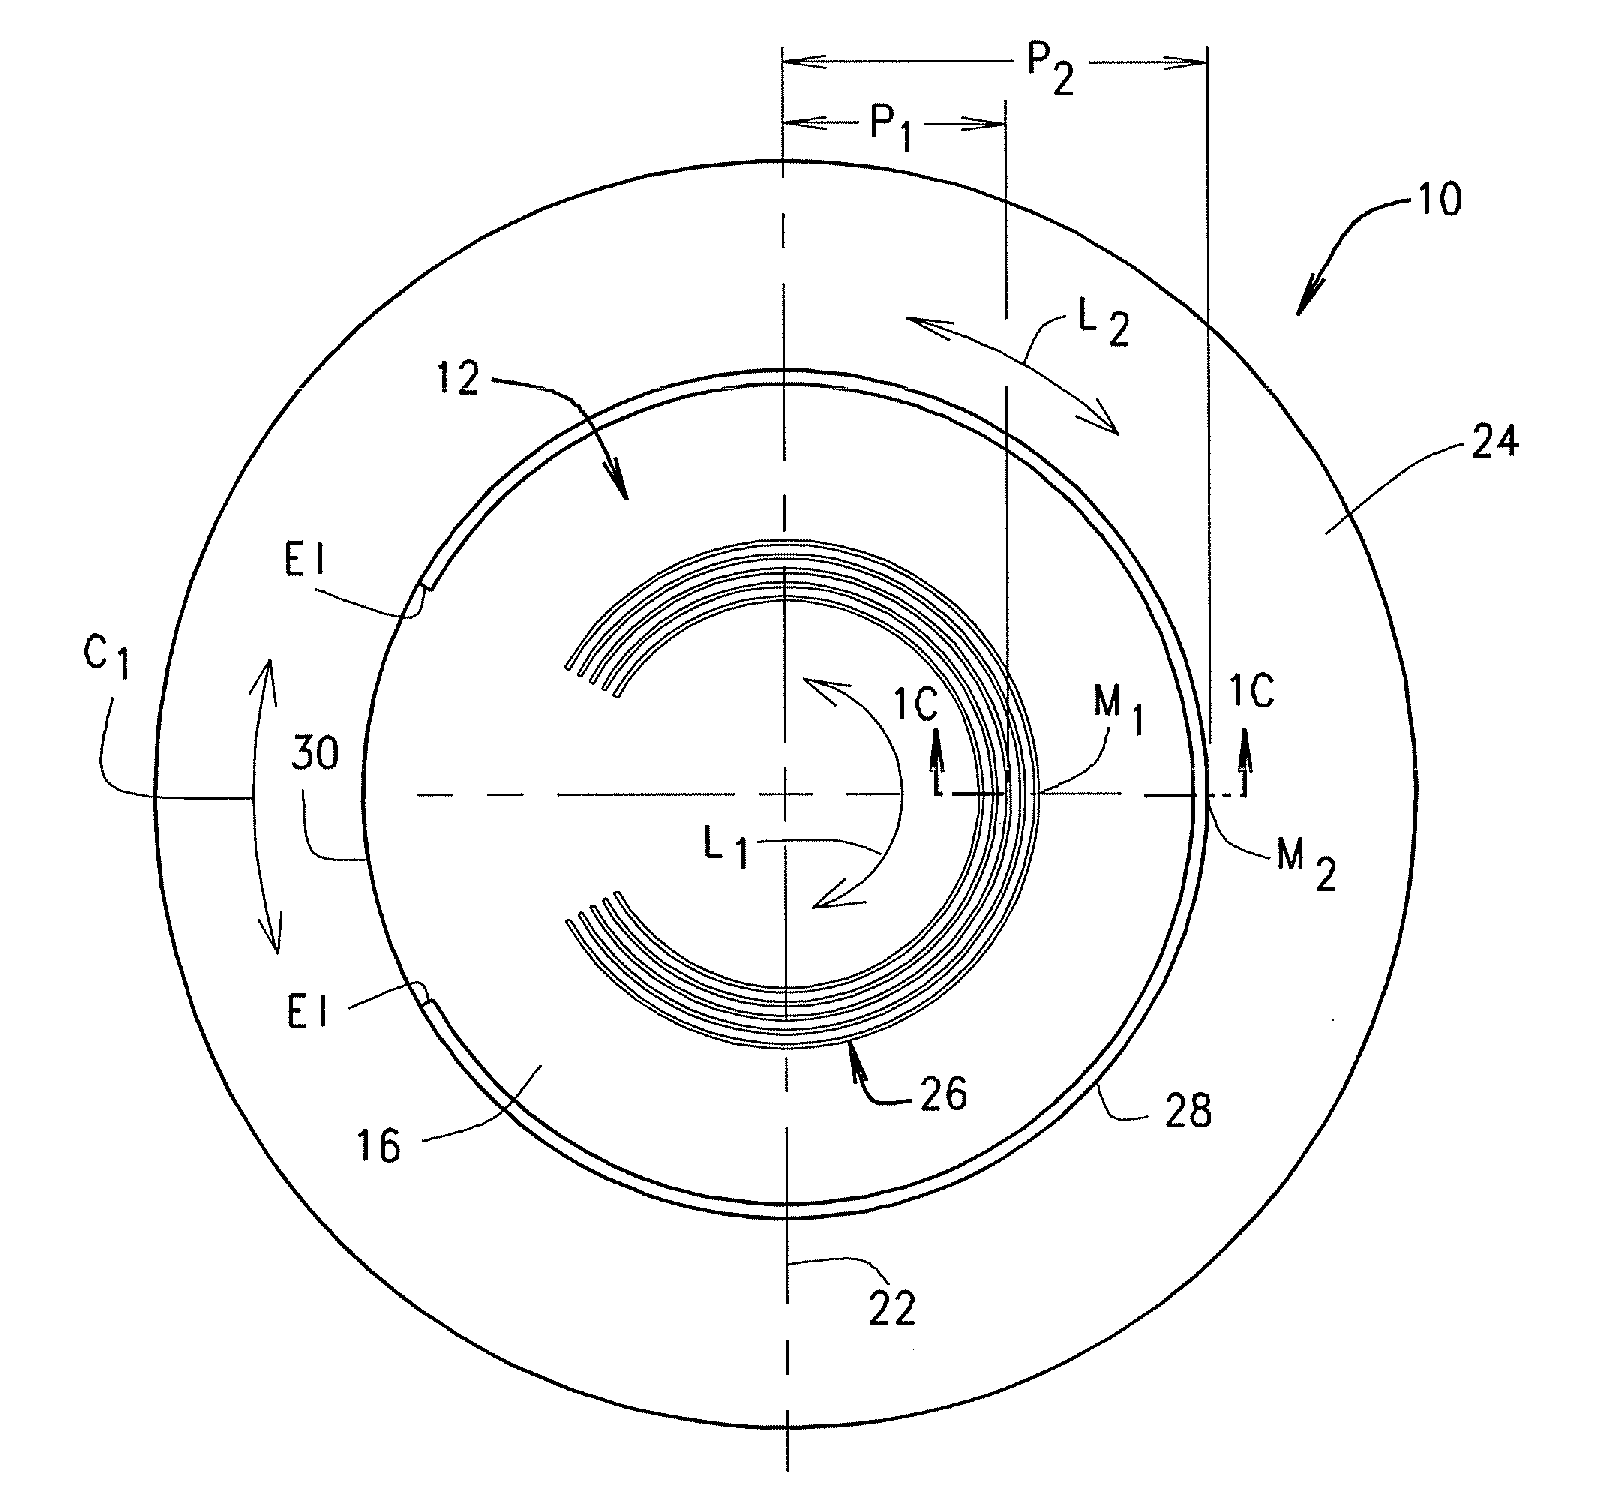 Controlling the rated burst pressure of a rupture disc through the use of control scores on the disc dome